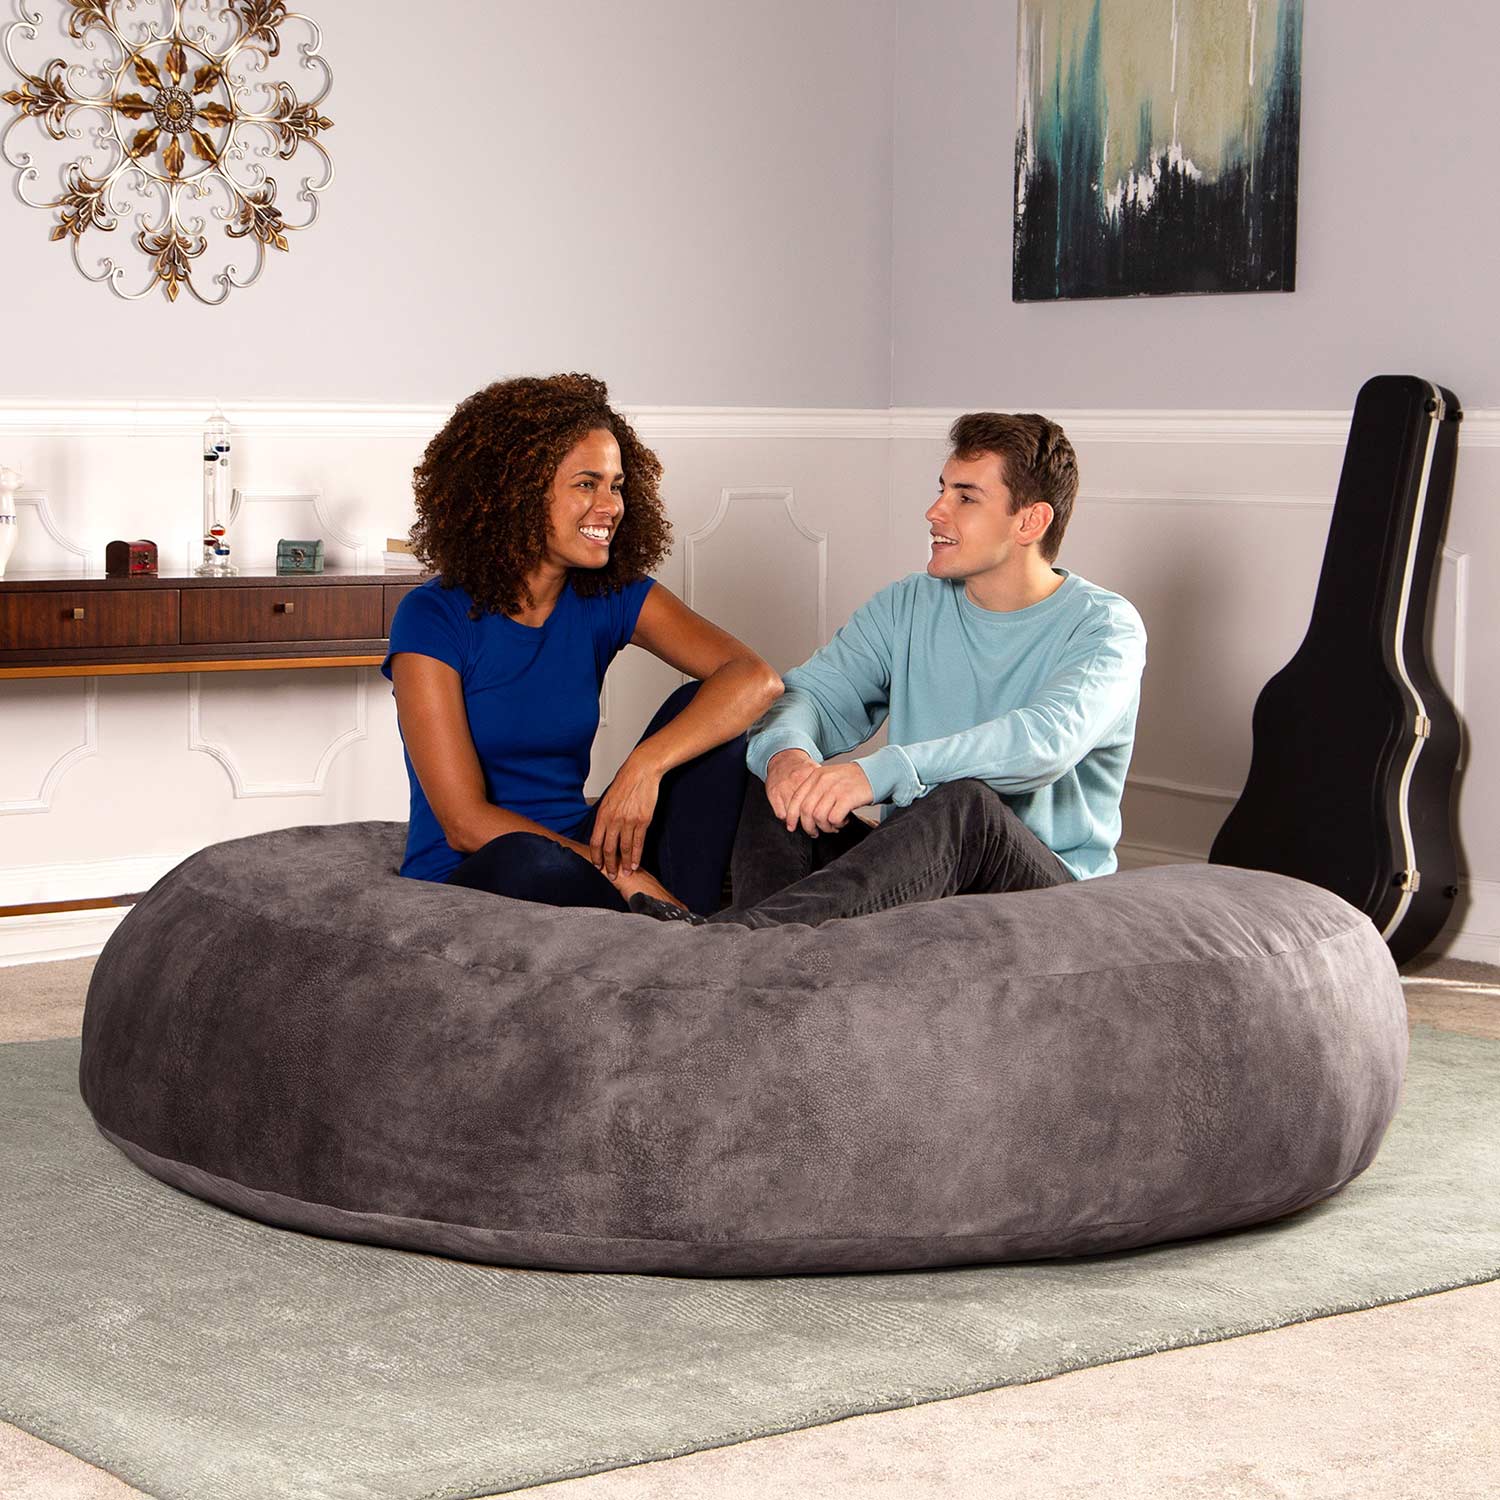 Decorating a Bachelor's Pad? Consider a Bean Bag Chair – The Fashionisto